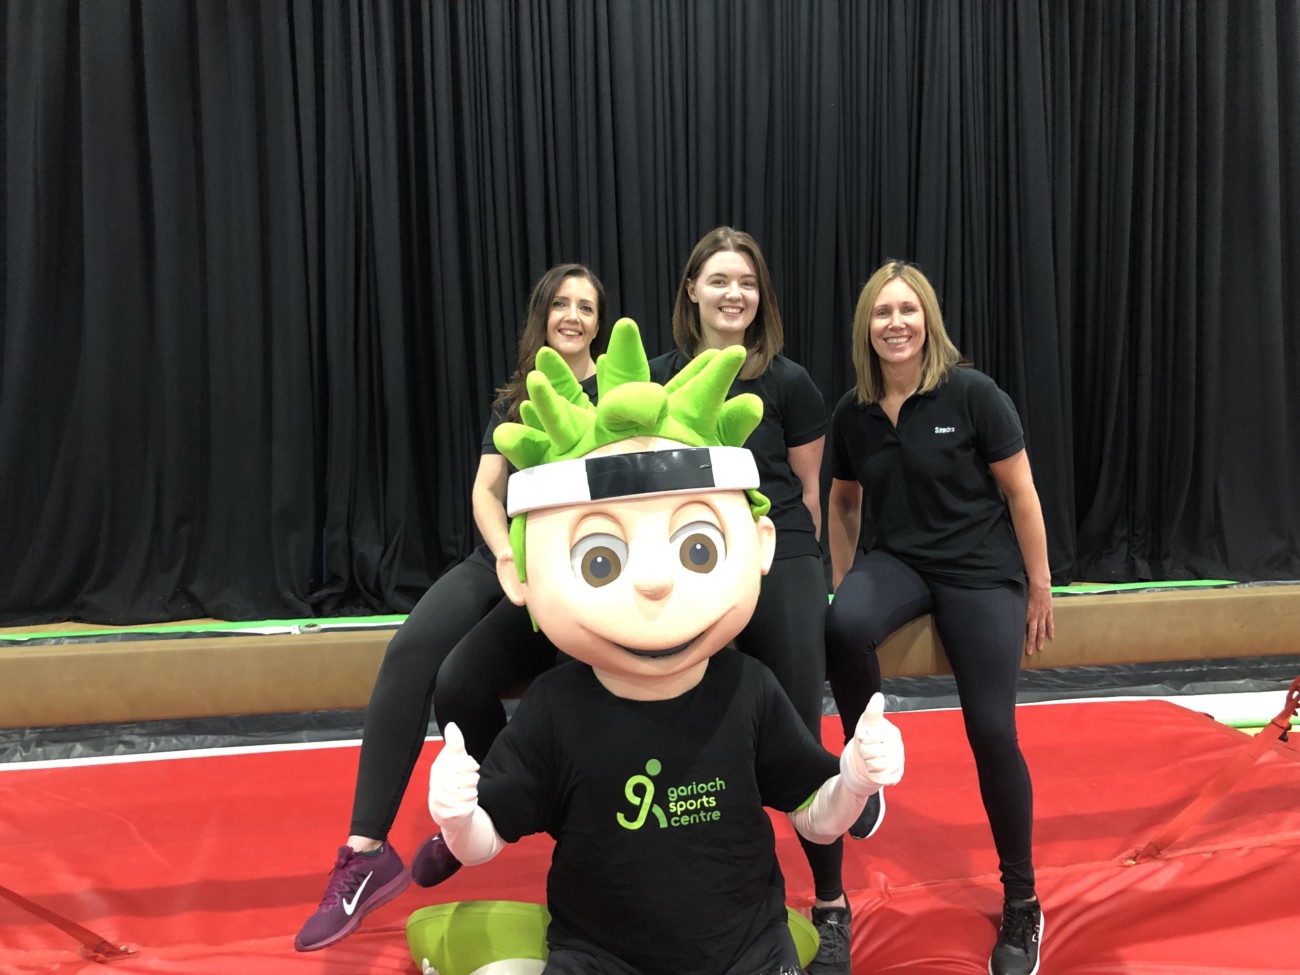 Garioch Sports Centre Partners with Inverurie’s Donside Gymnastics